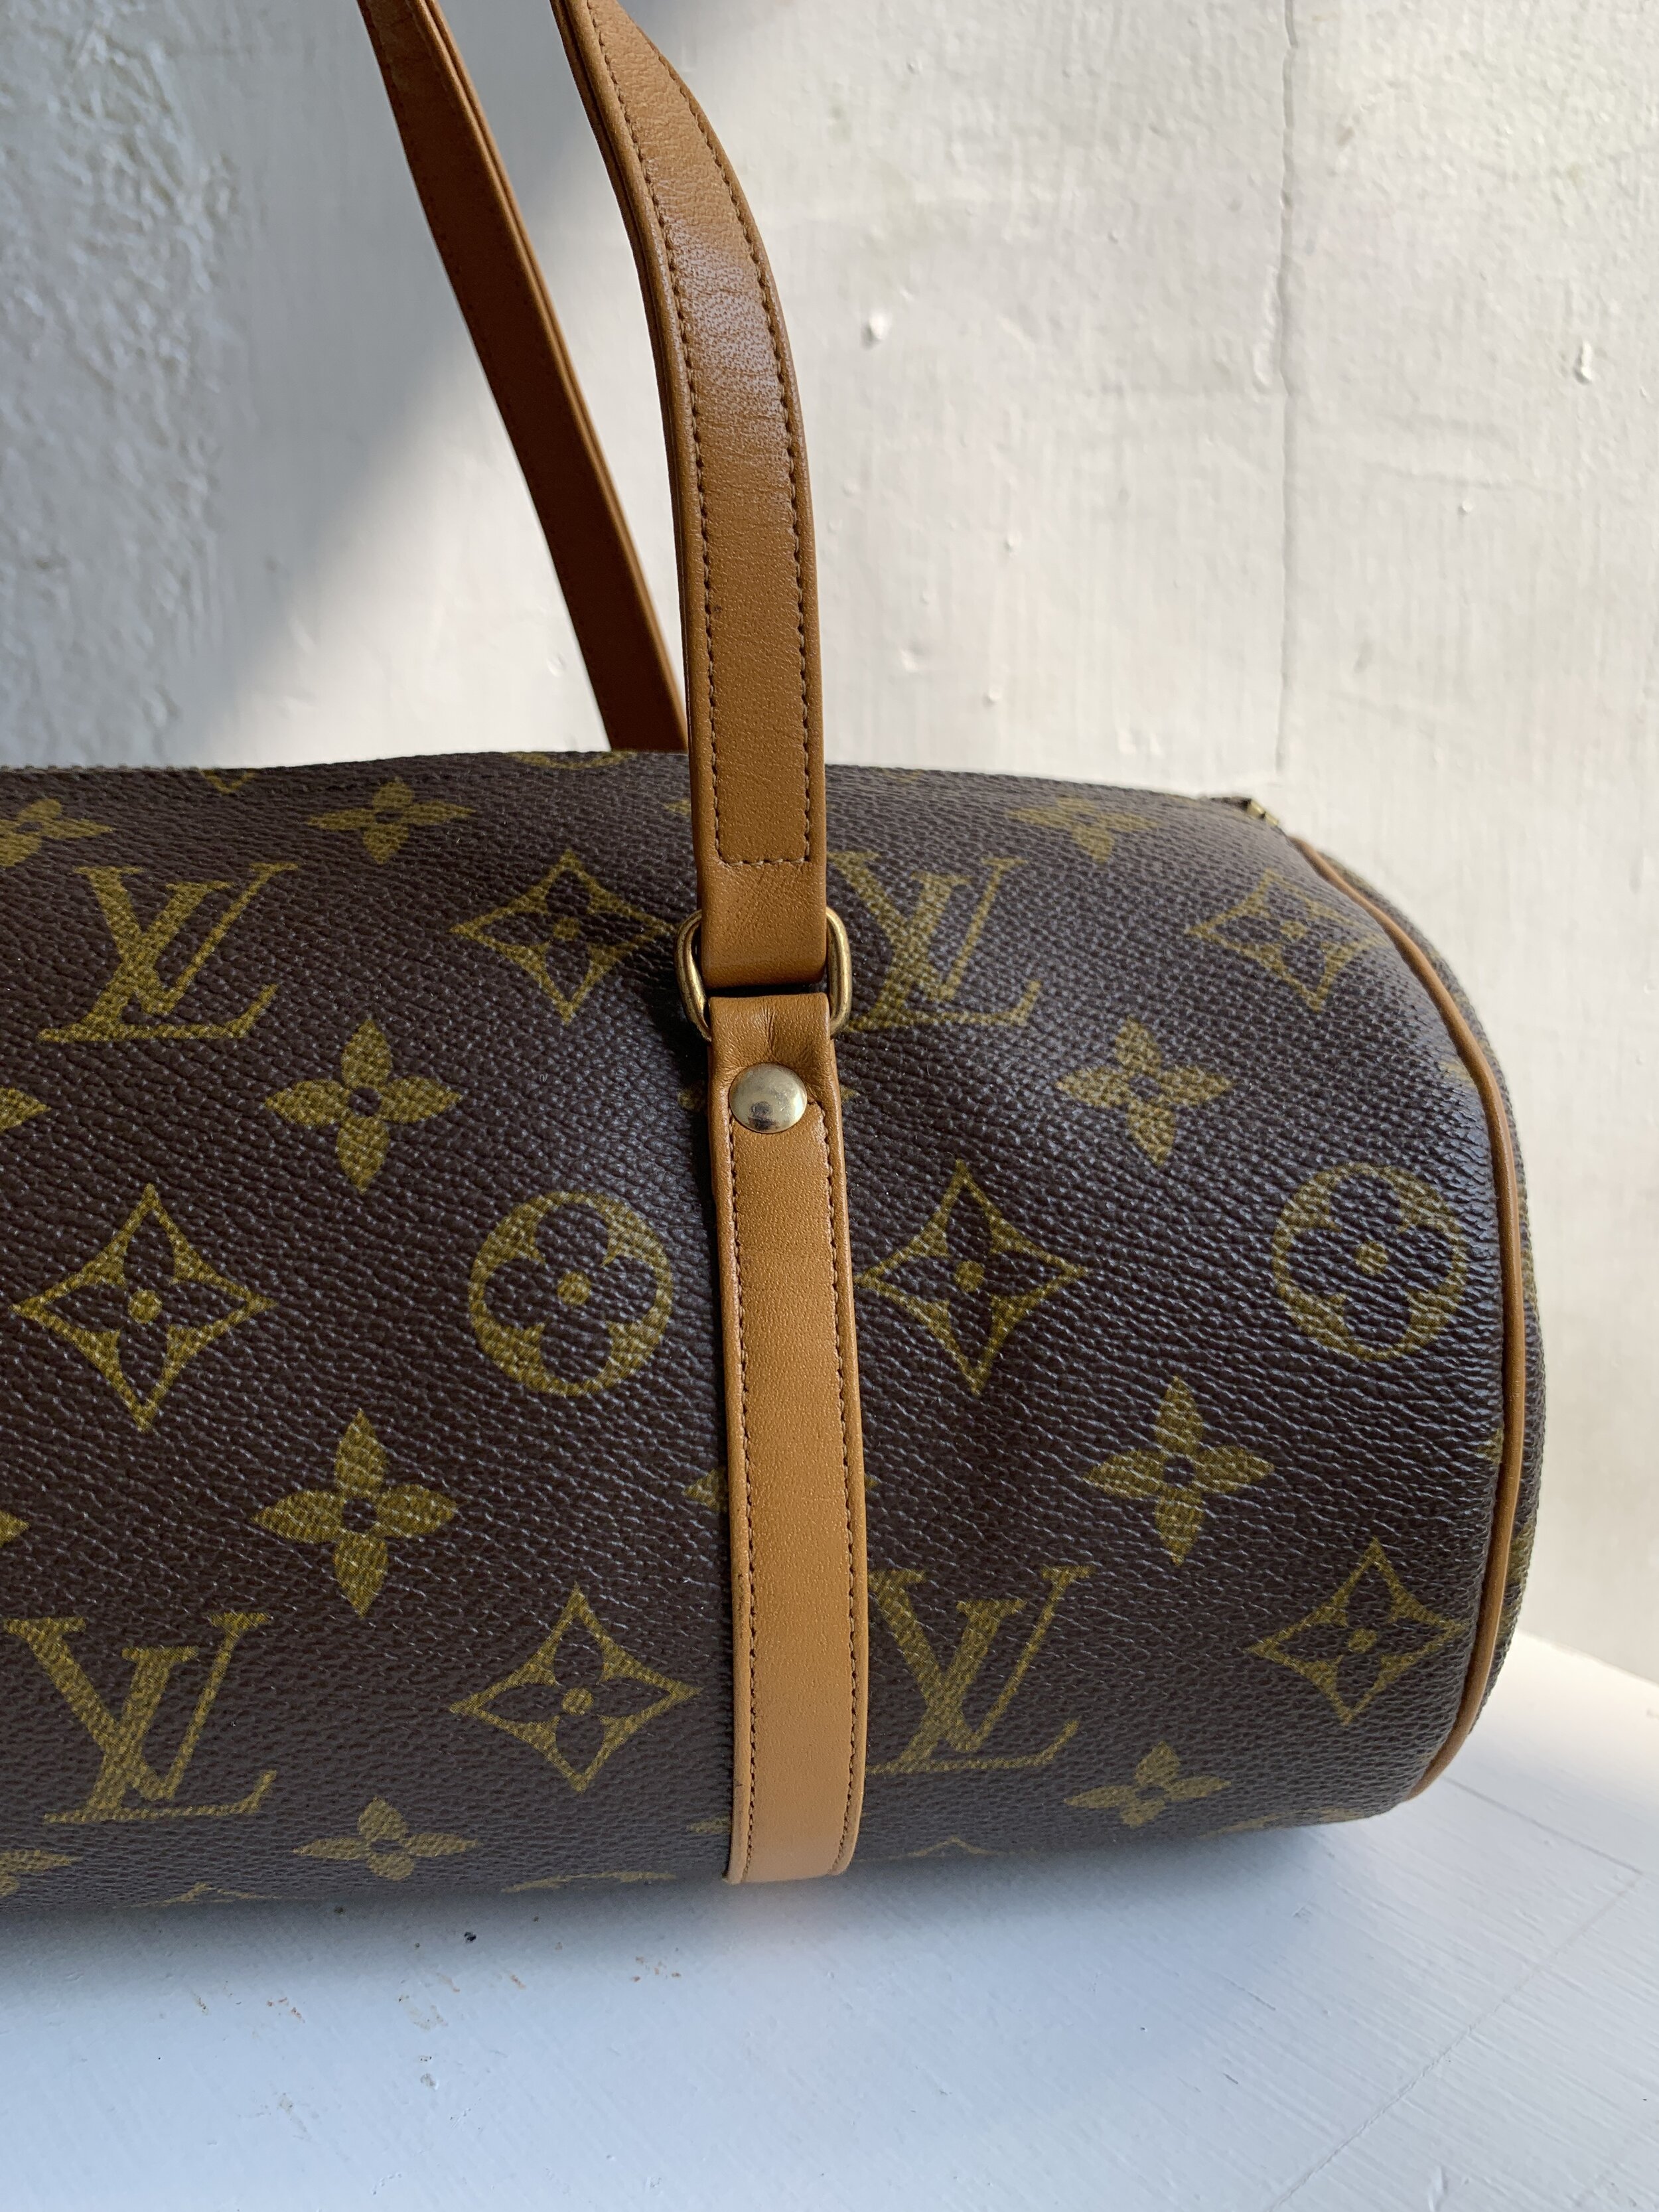 Authentic-Louis-Vuitton-Monogram-Papillon-26-Hand-Bag-Old-Style-M51366-Used-F/S  – dct-ep_vintage luxury Store